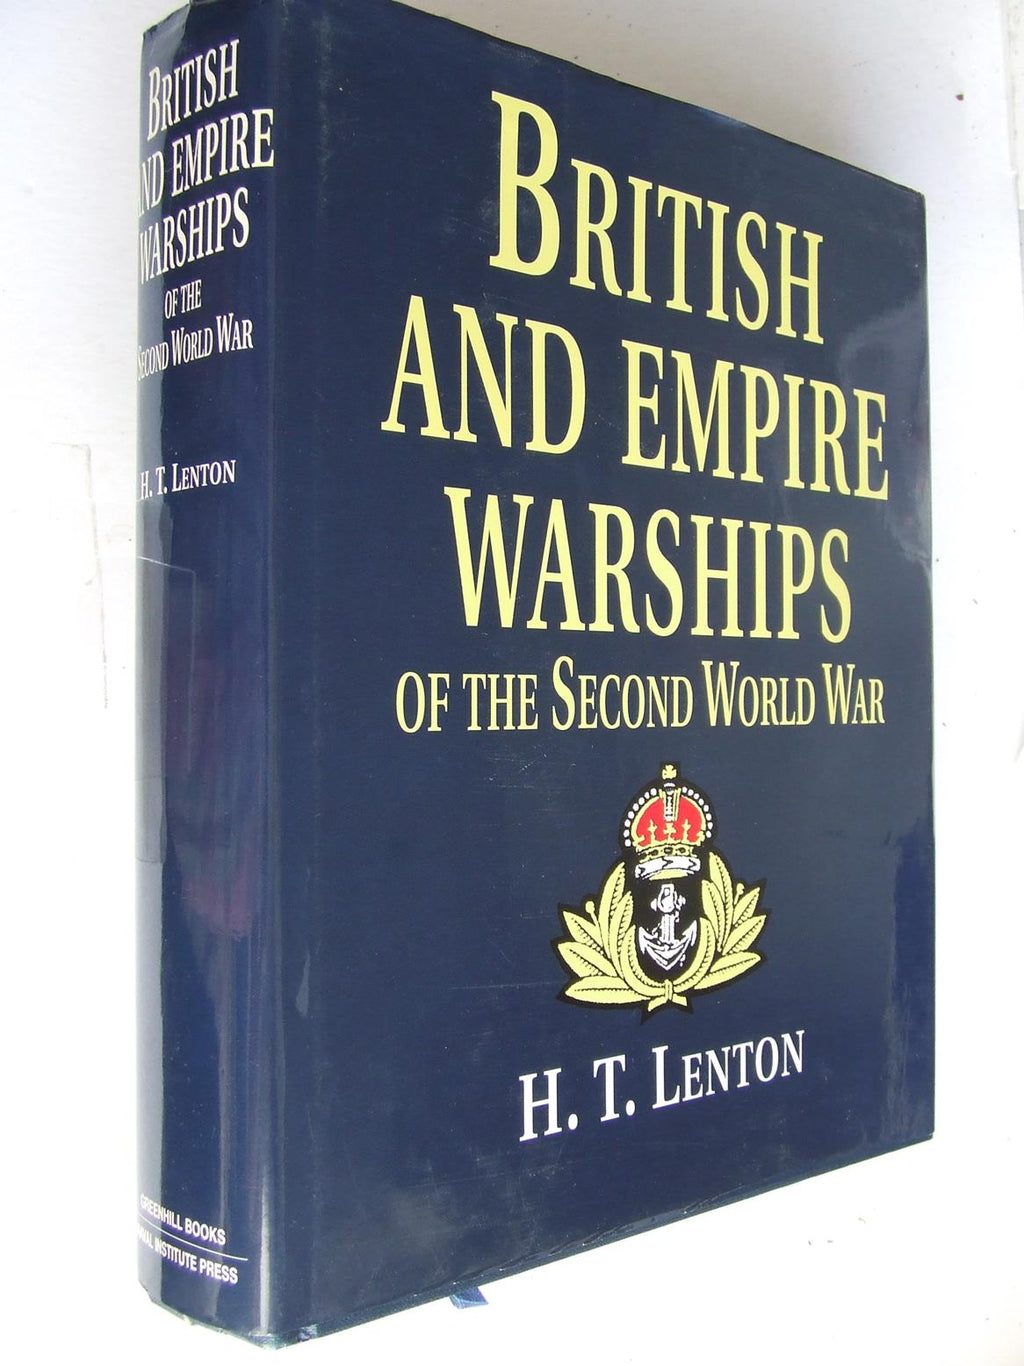 British and Empire Warships of the Second World War